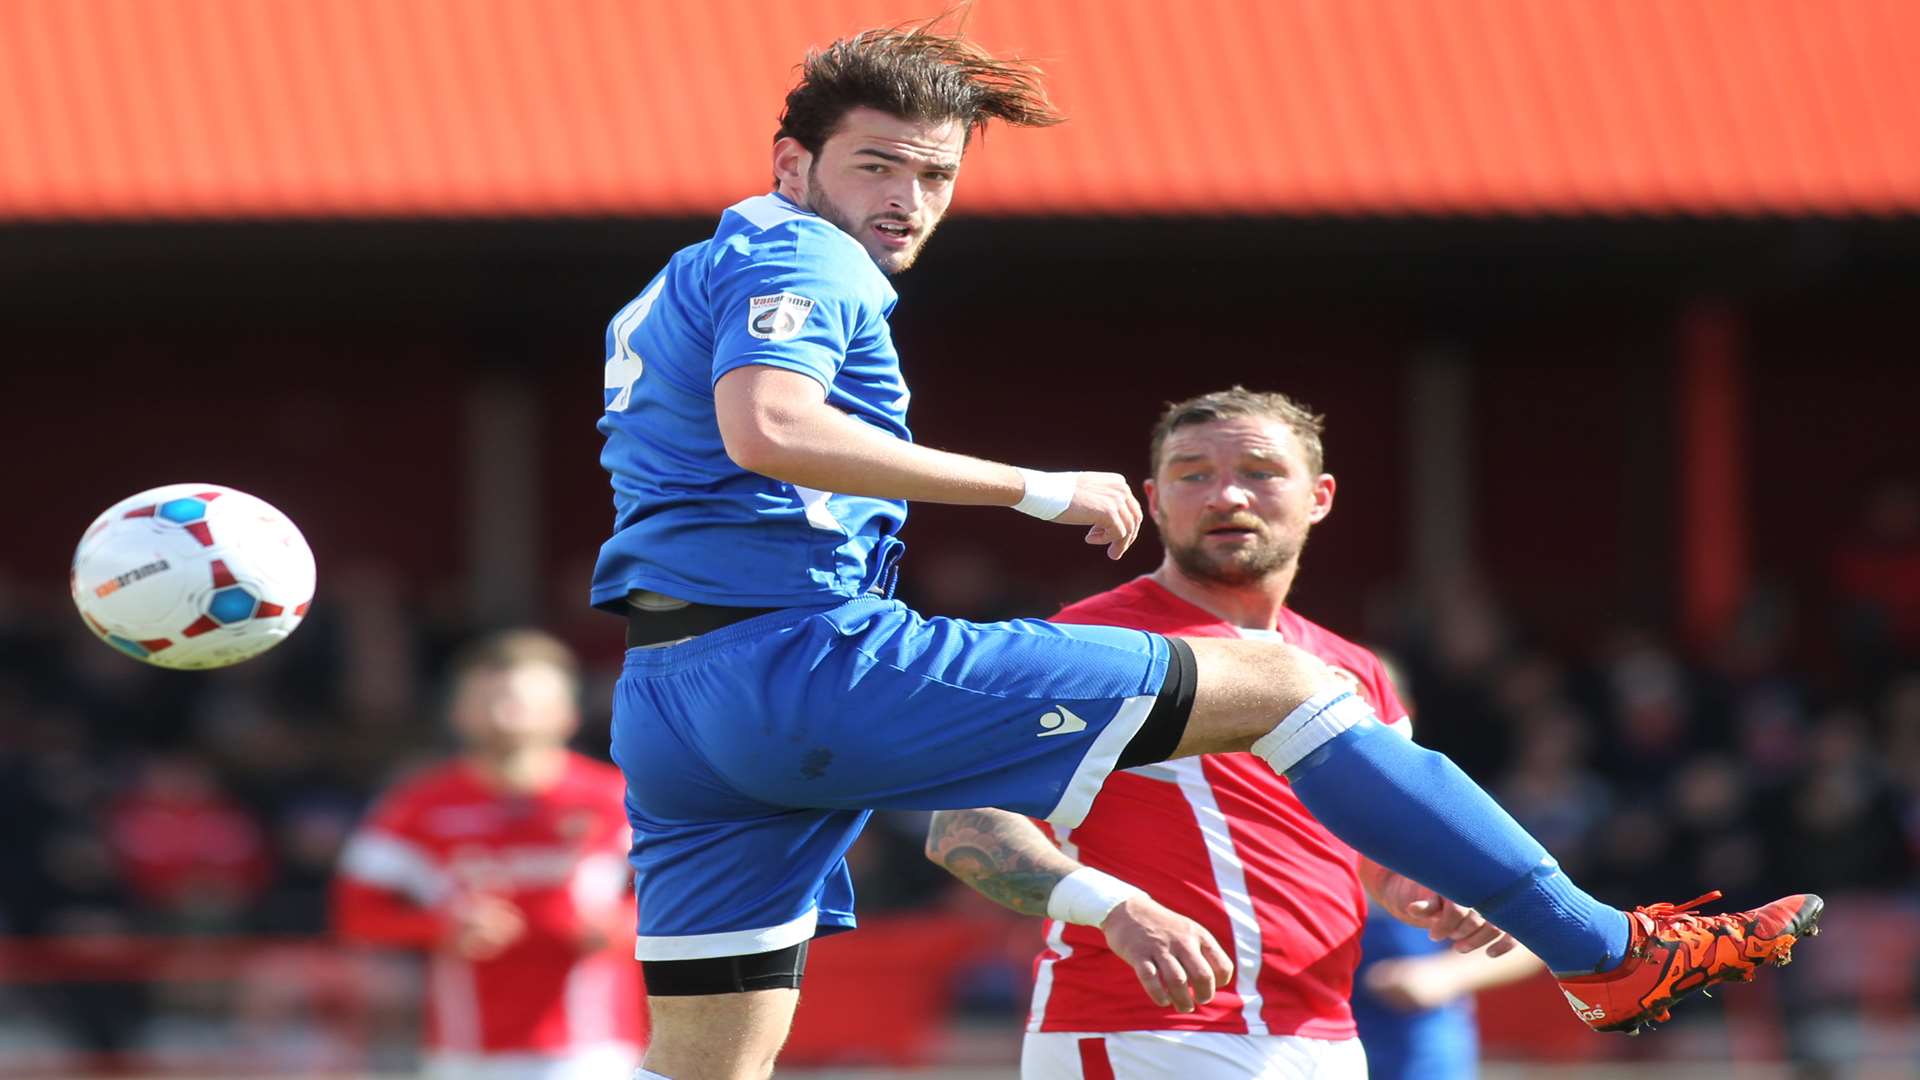 Ronnie Vint heads the ball away from Ebbsfleet's Danny Kedwell Picture: John Westhrop